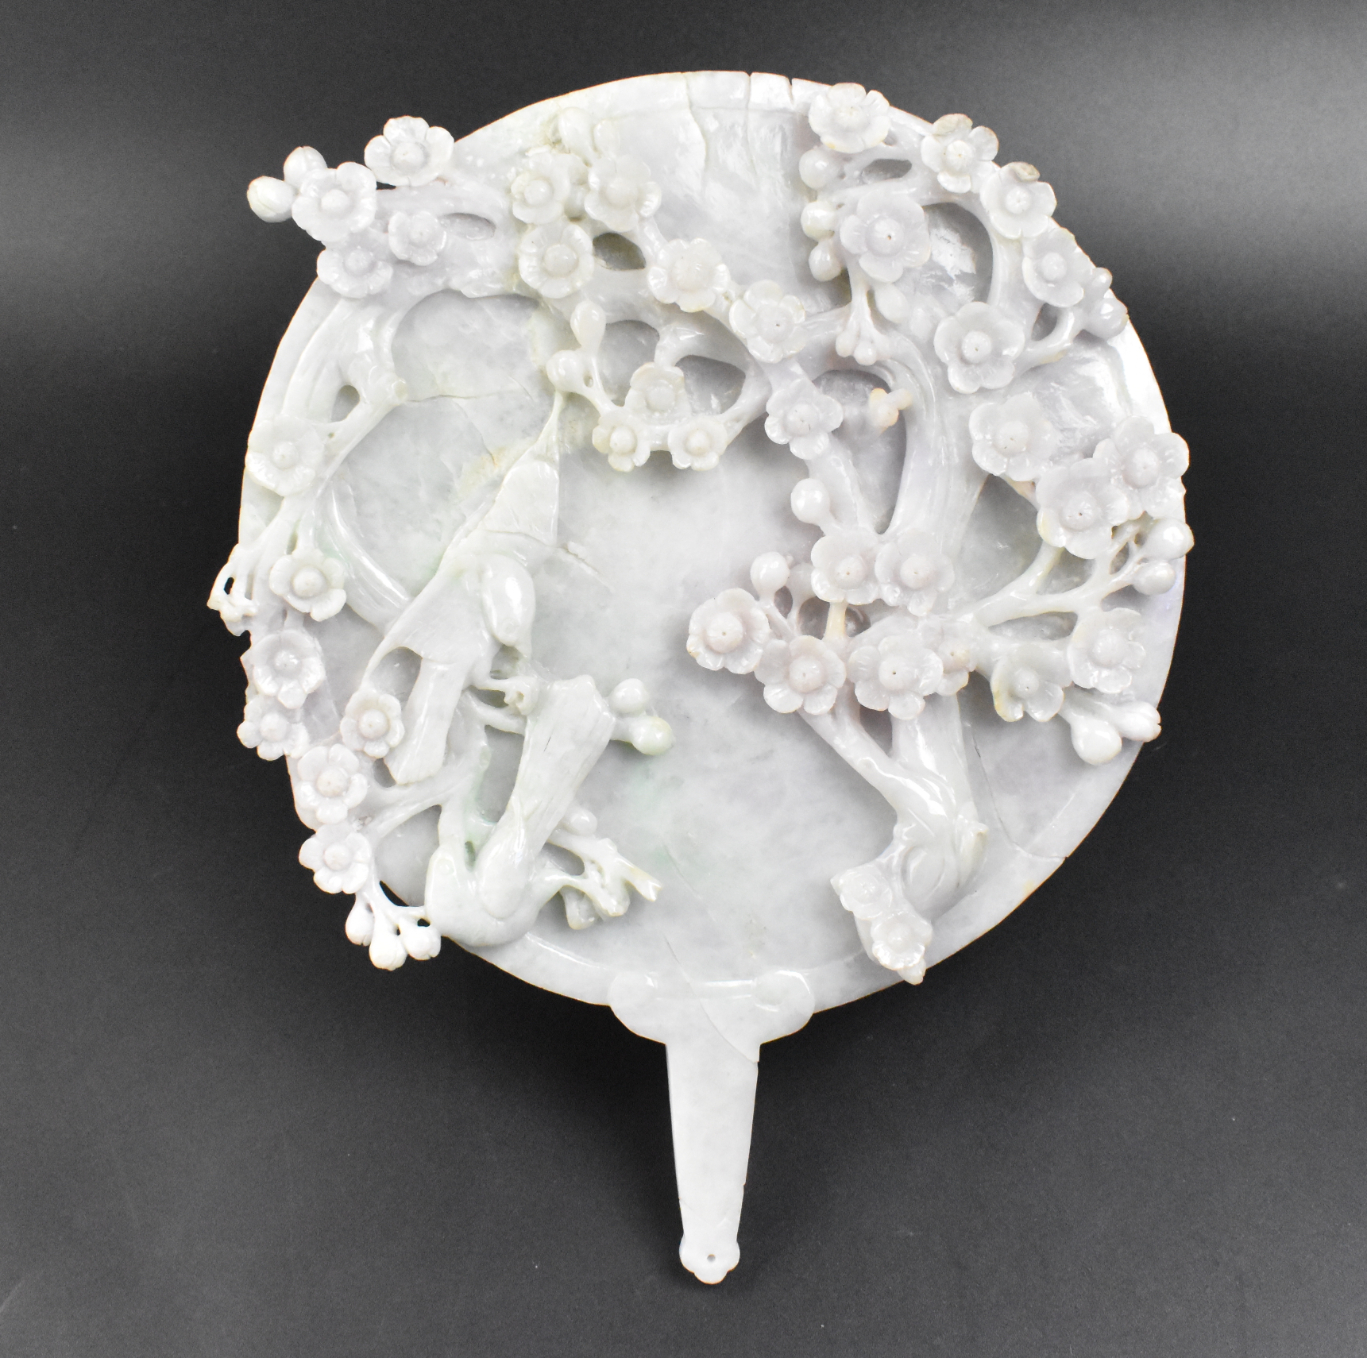 A CHINESE FAN SHAPED JADEITE CARVING 3015a4